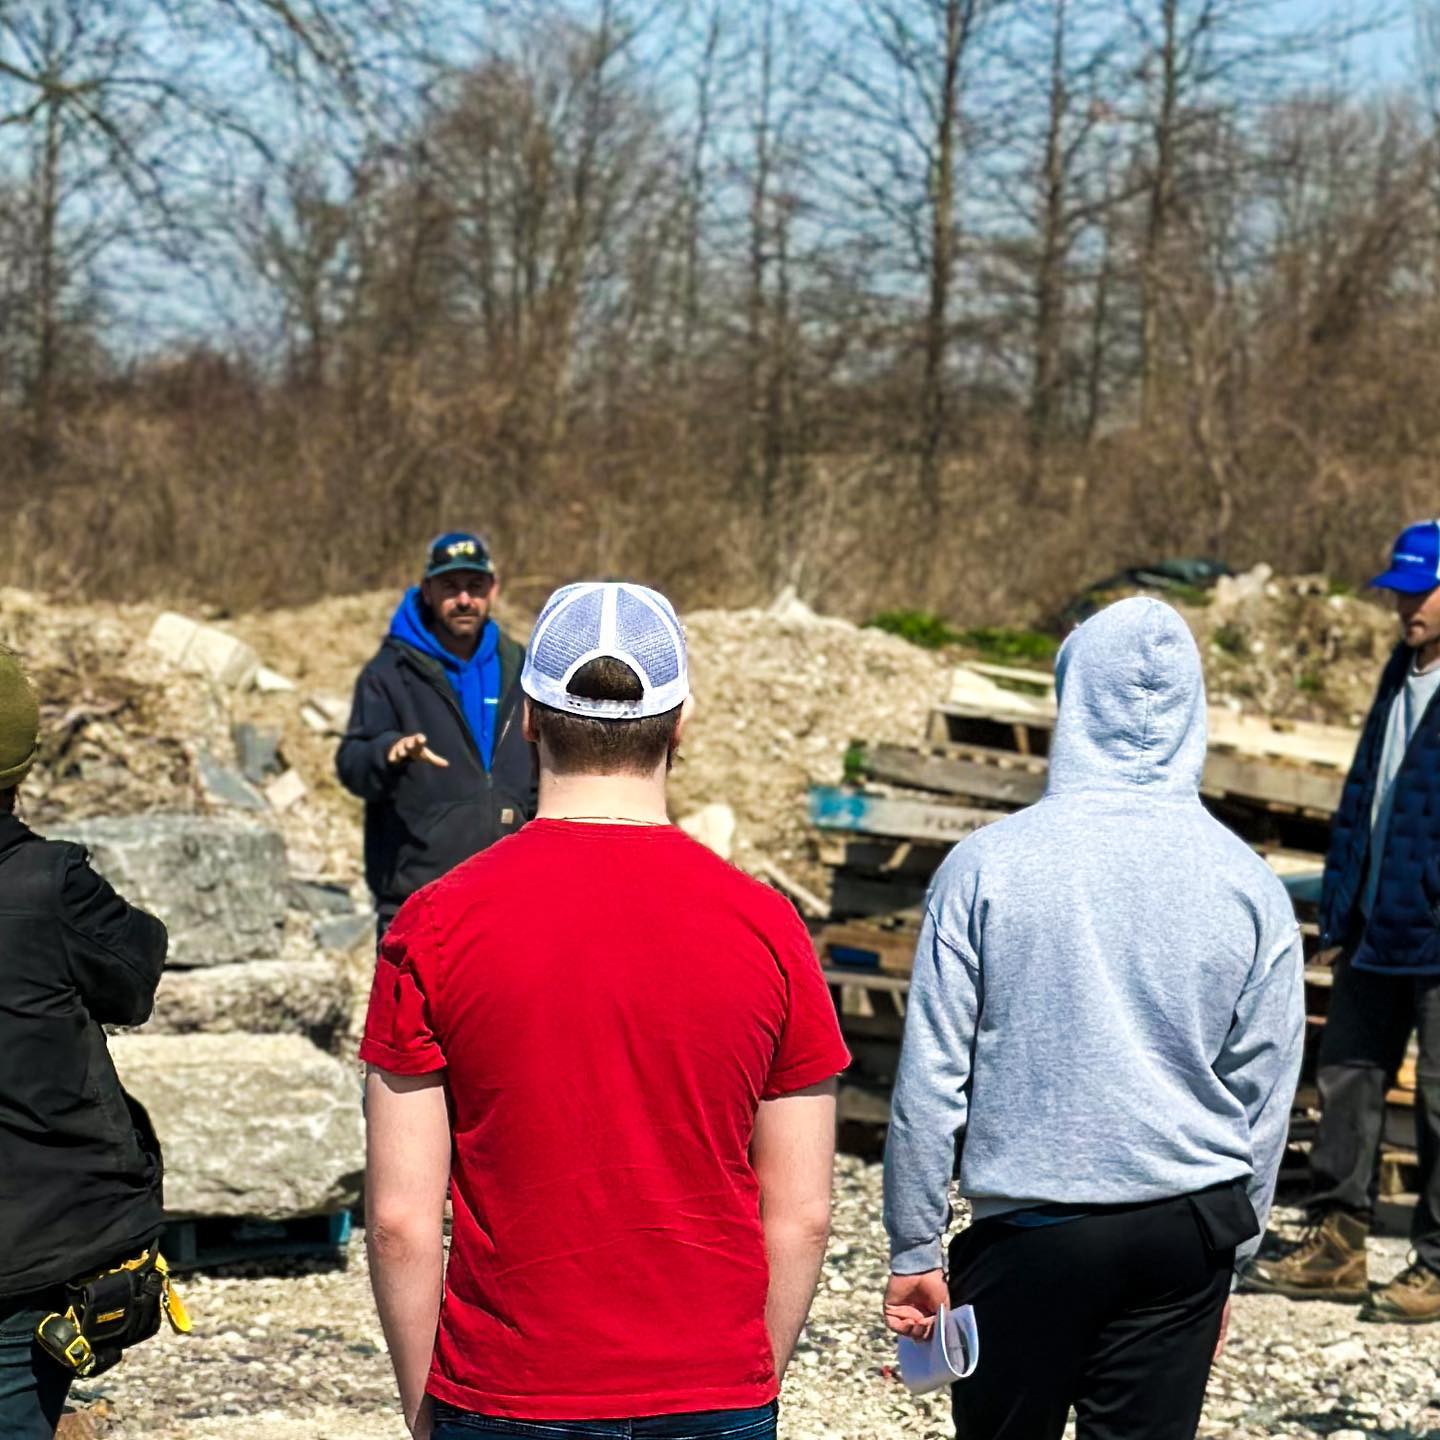 A group of people, with one gesturing and explaining, are standing outdoors in a construction area with concrete debris and bare trees in the background.